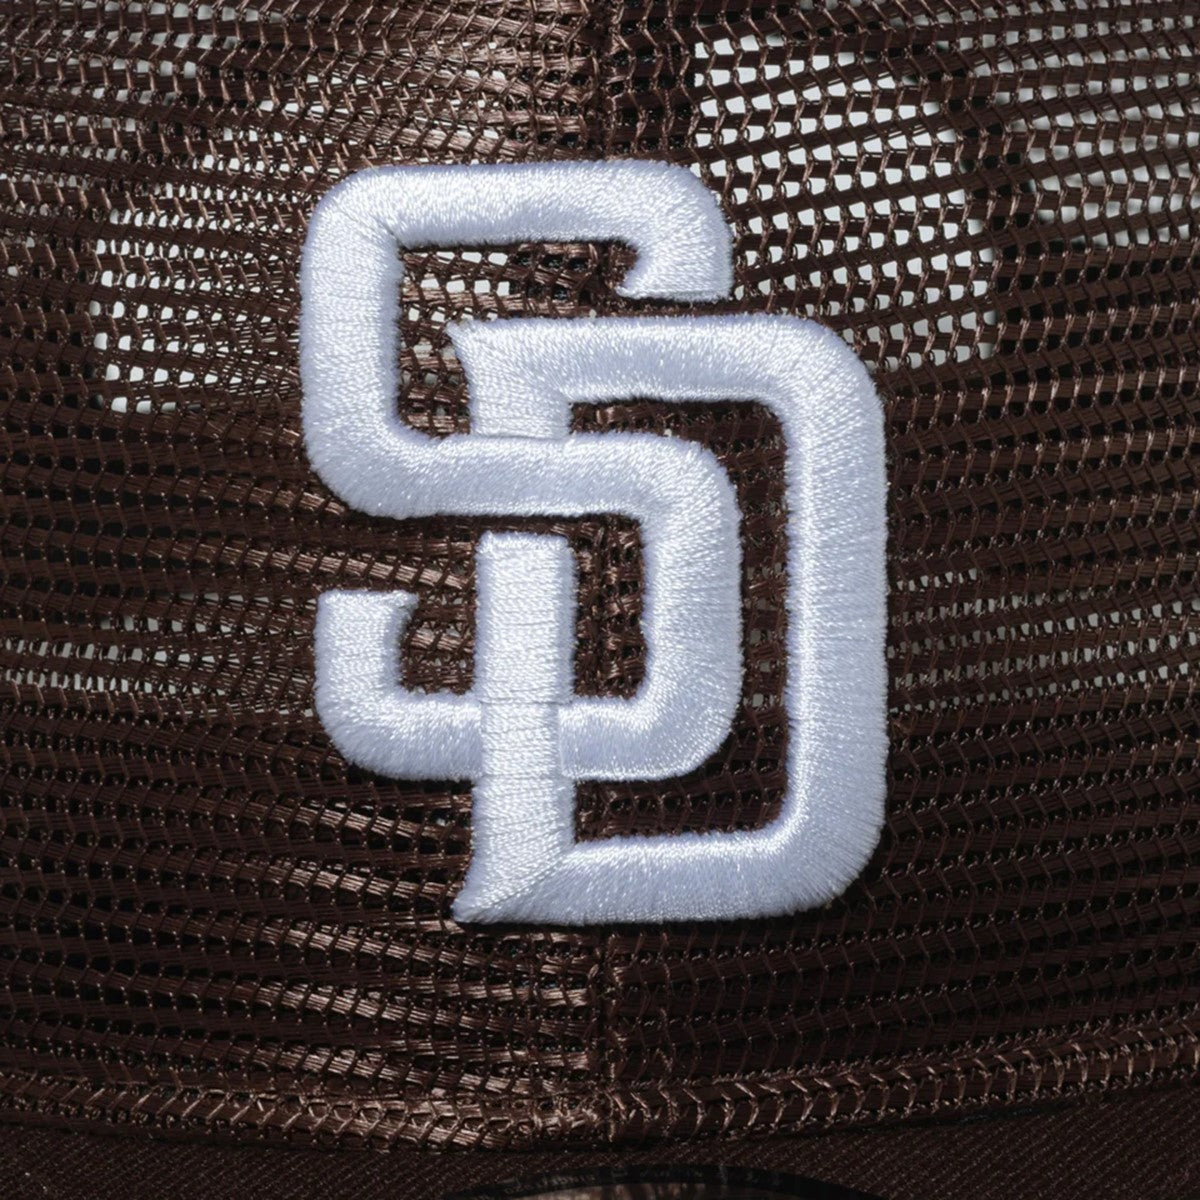 NEW ERA San Diego Padres - 9FIFTY ALL MESH SP BWOOD【14109642】